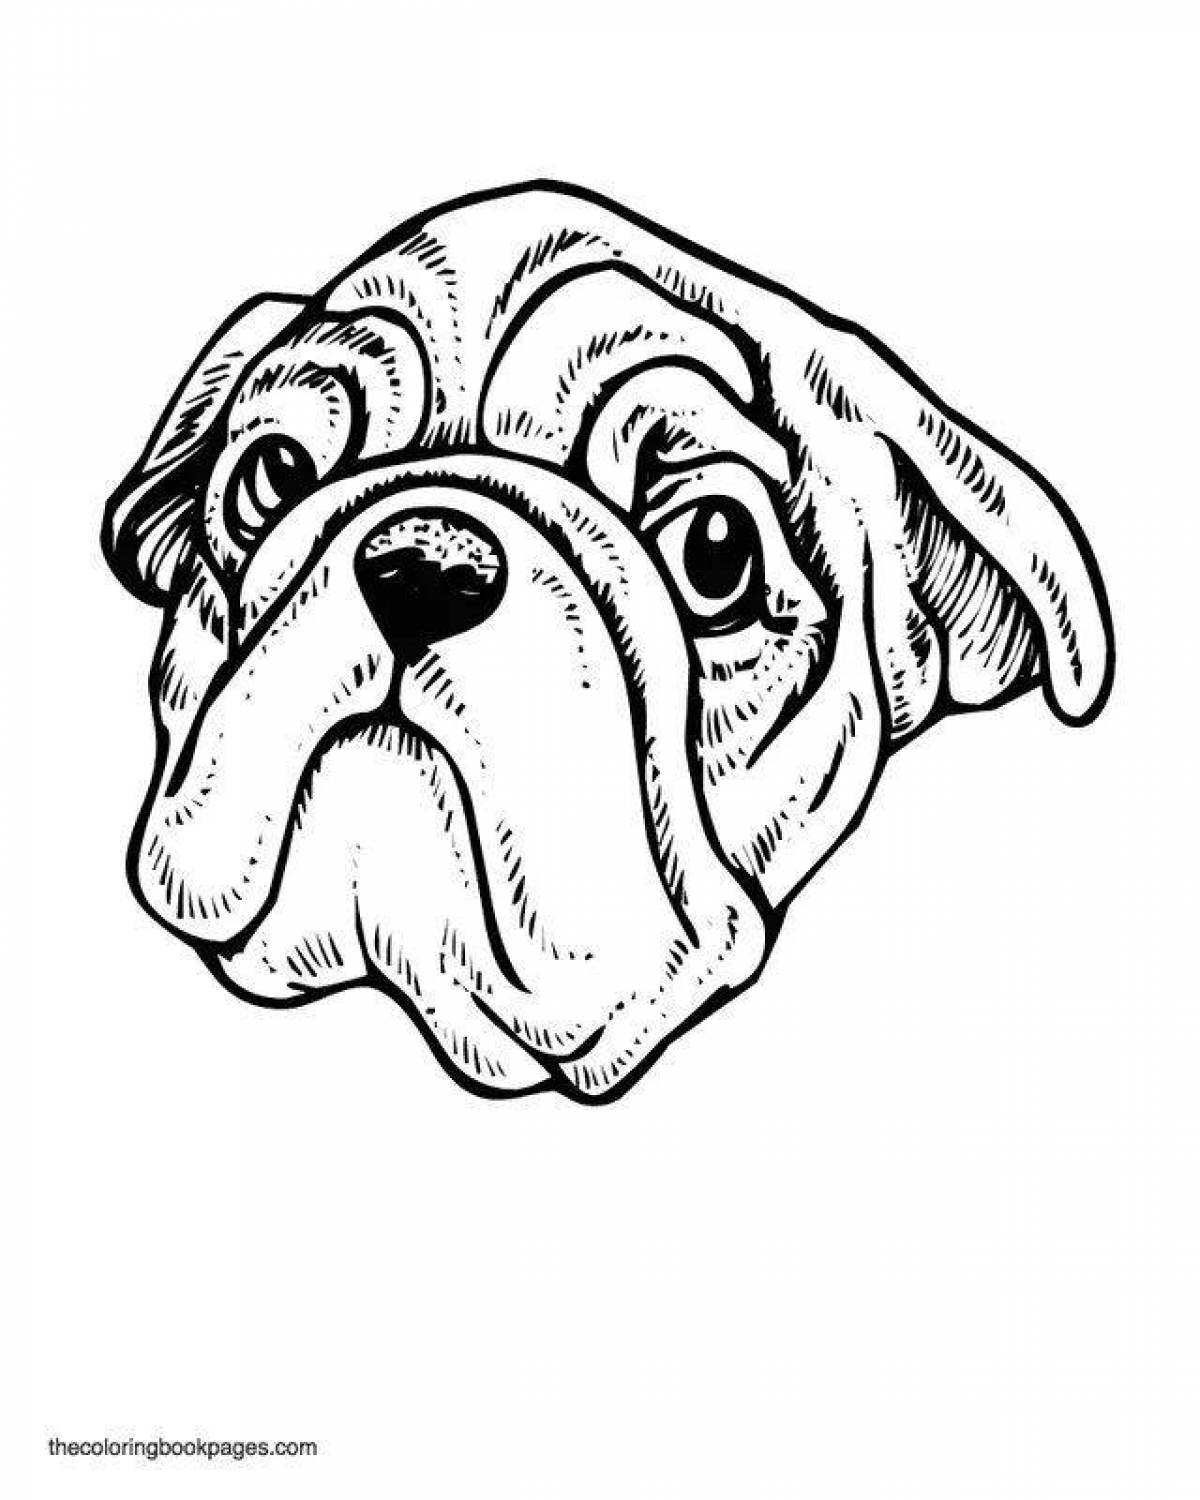 Coloring page blooming dog muzzle